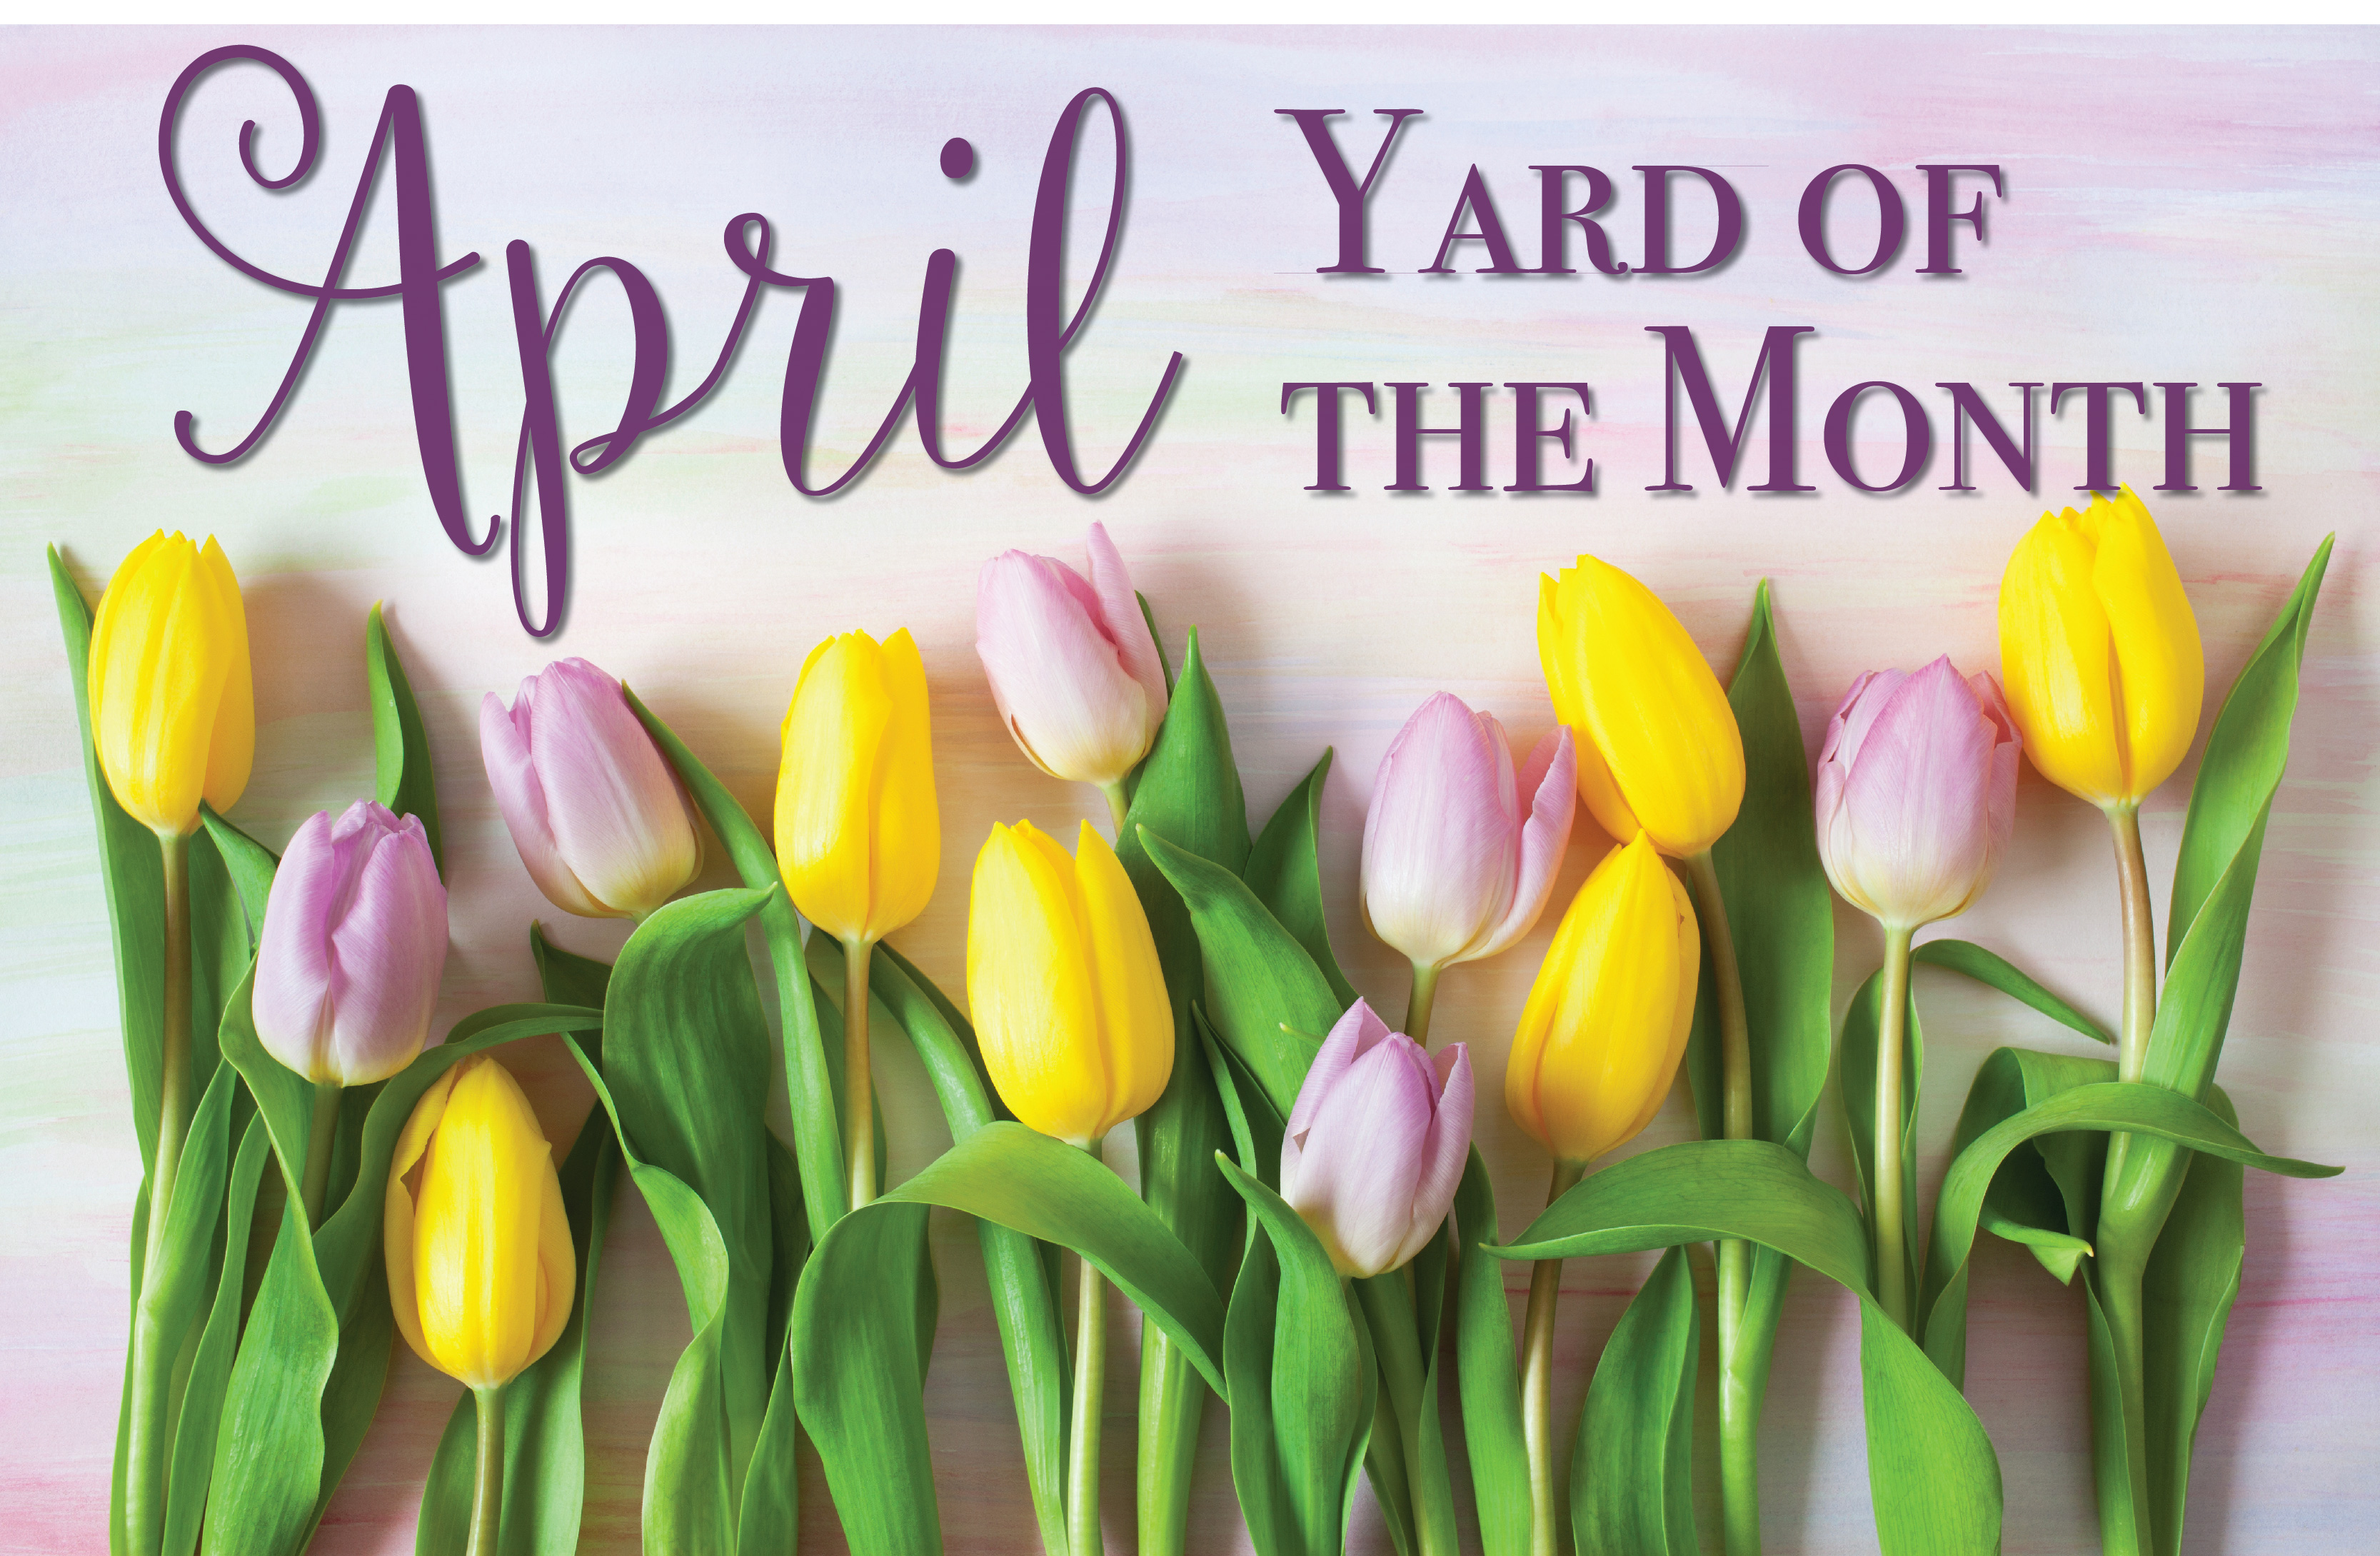 Memorial Parkway Announces April Yard of the Month Winners